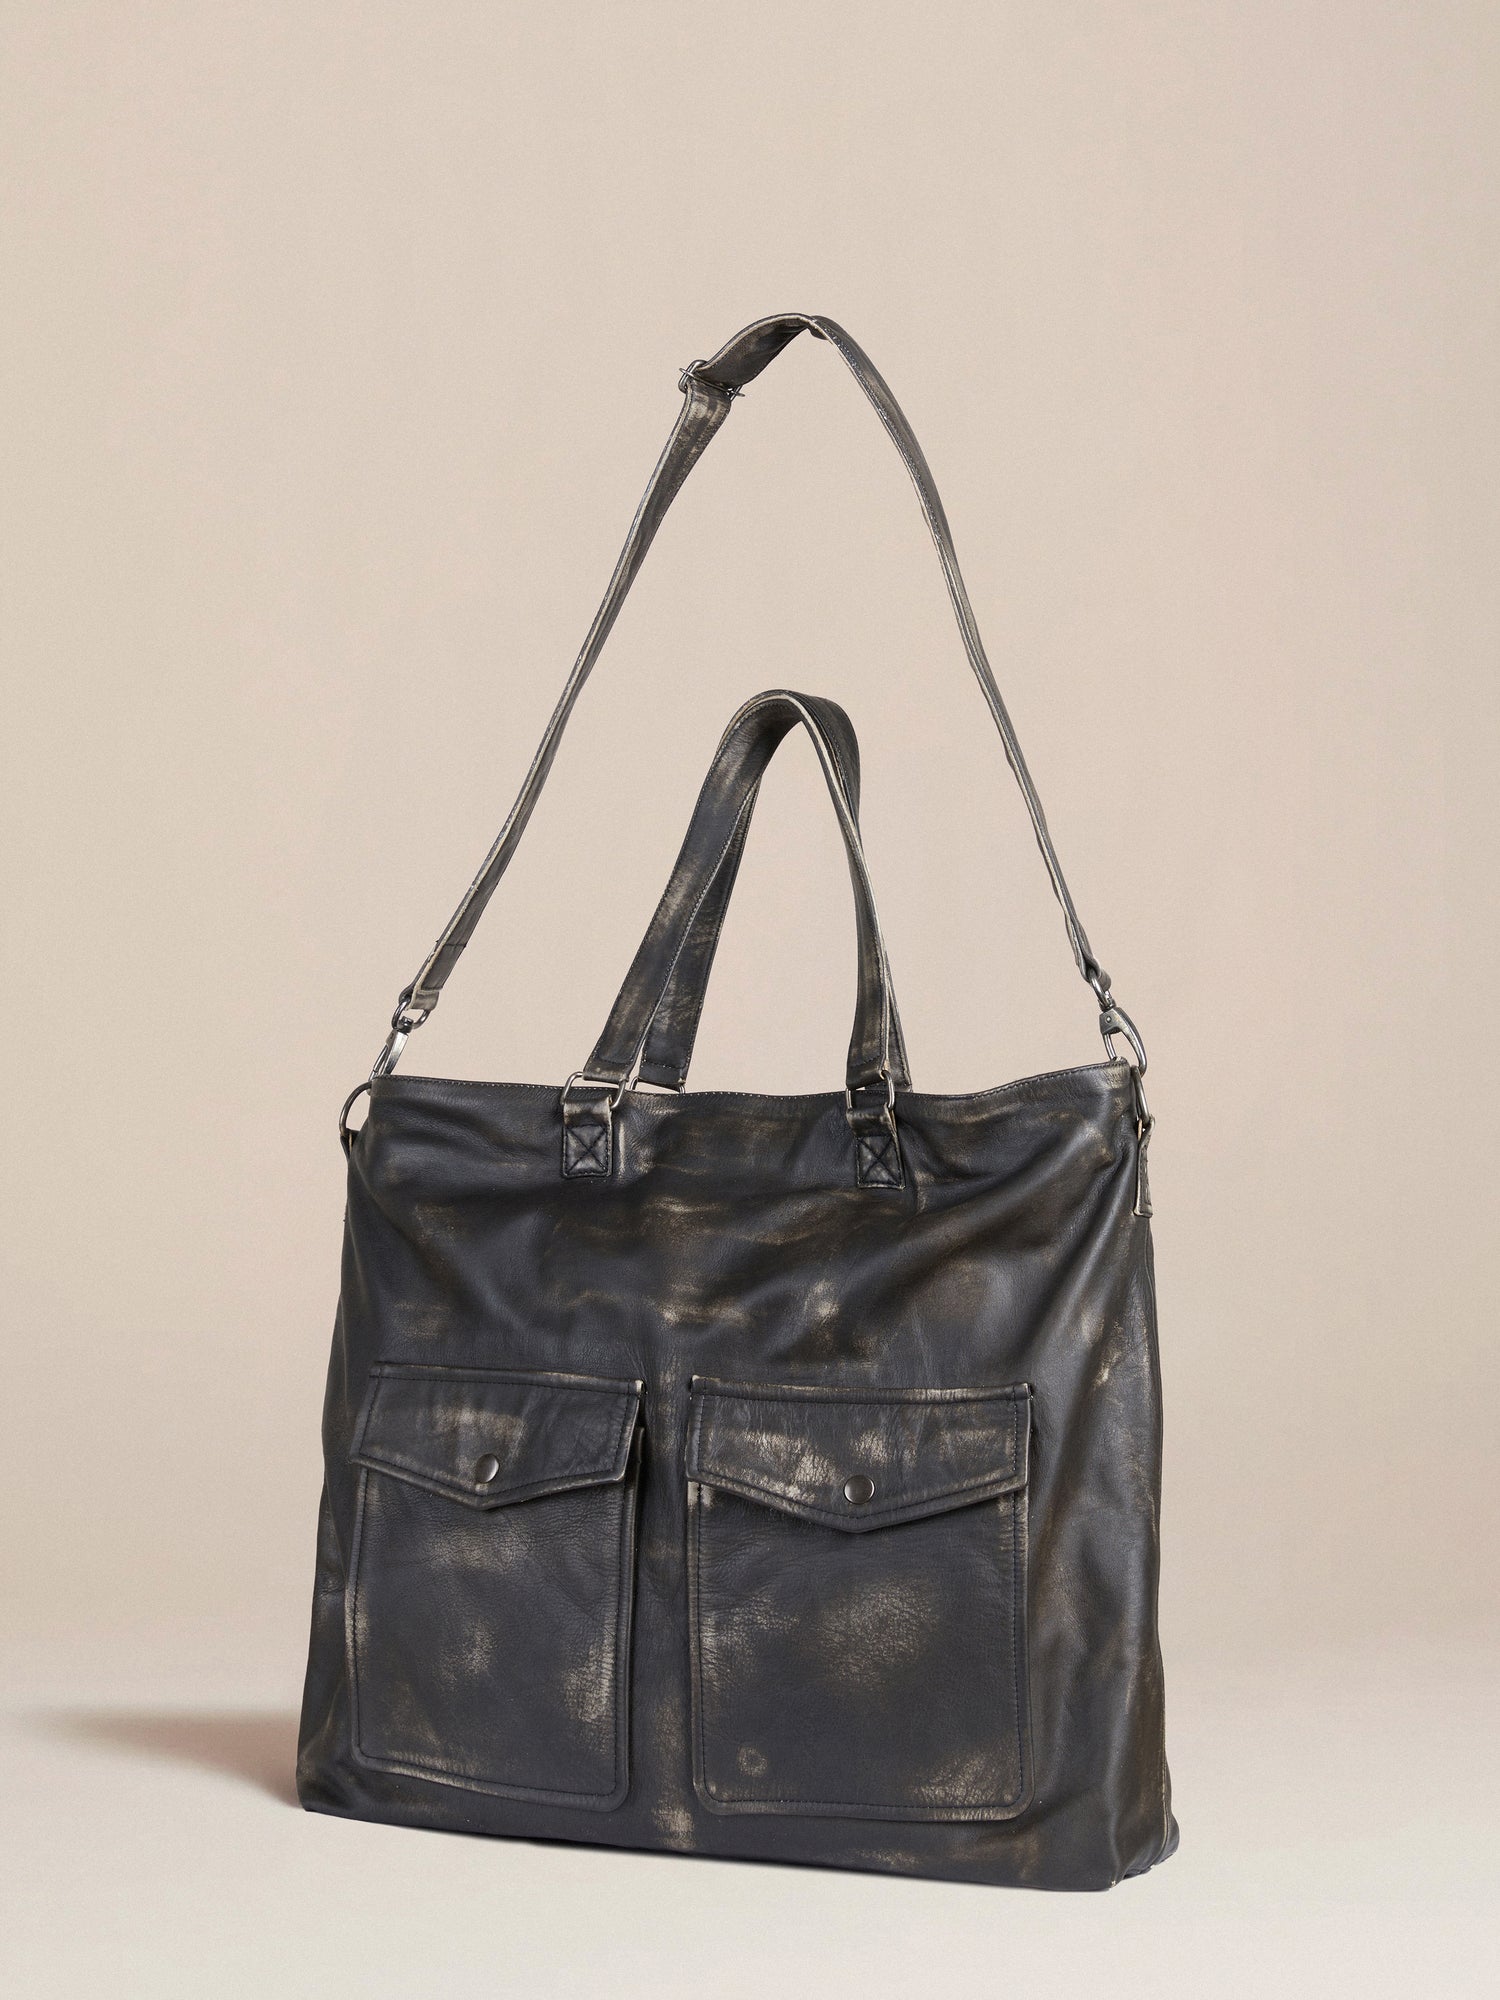 A Profound Hana distressed black leather tote bag with two pockets.